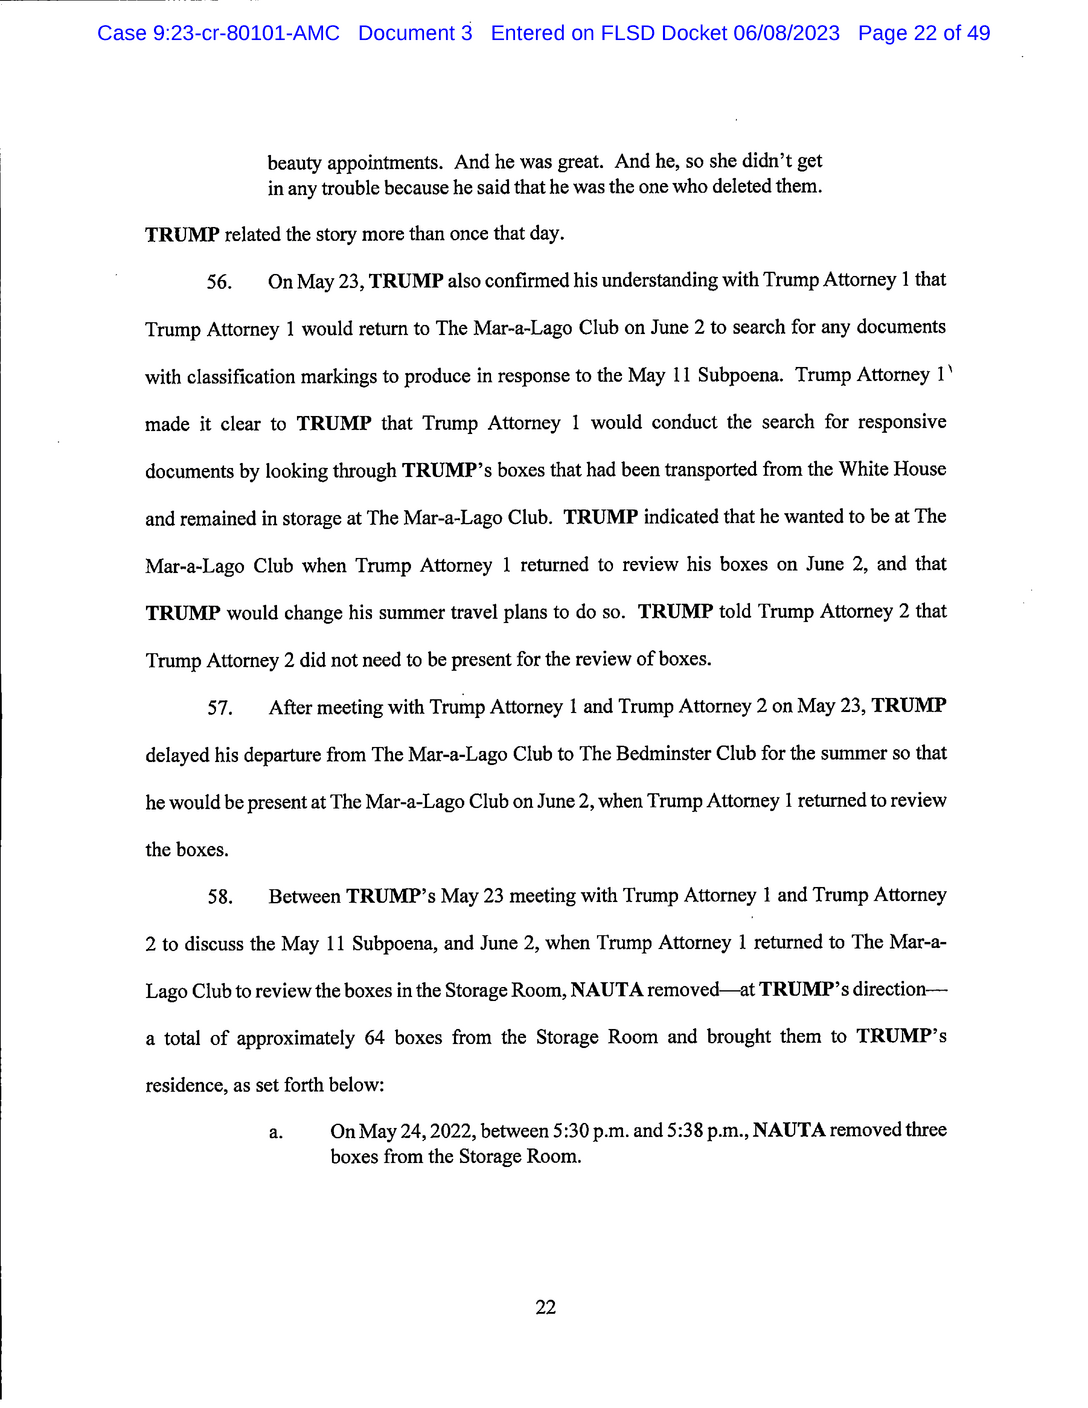 Page 22 of Donald Trump Classified Documents Indictment PDF document.